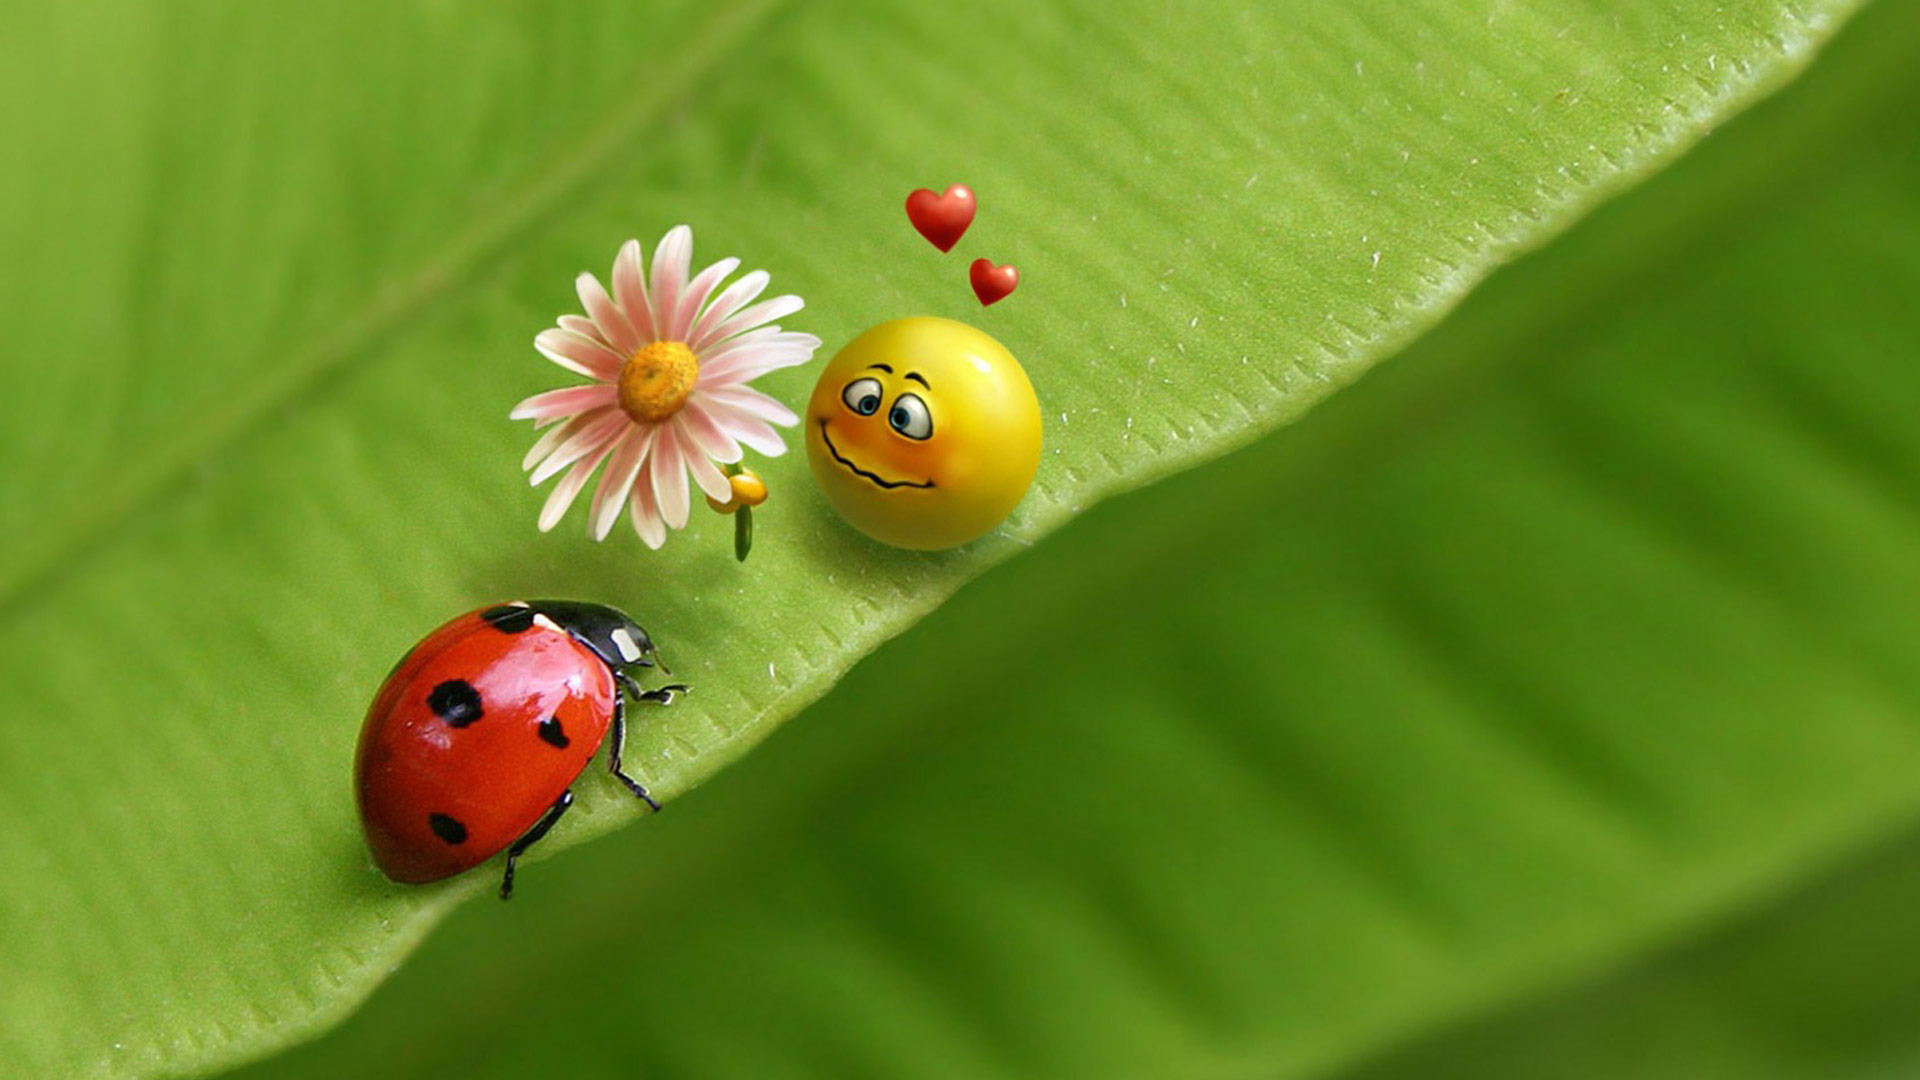 Ladybug And Smiley Face In Love Wallpaper